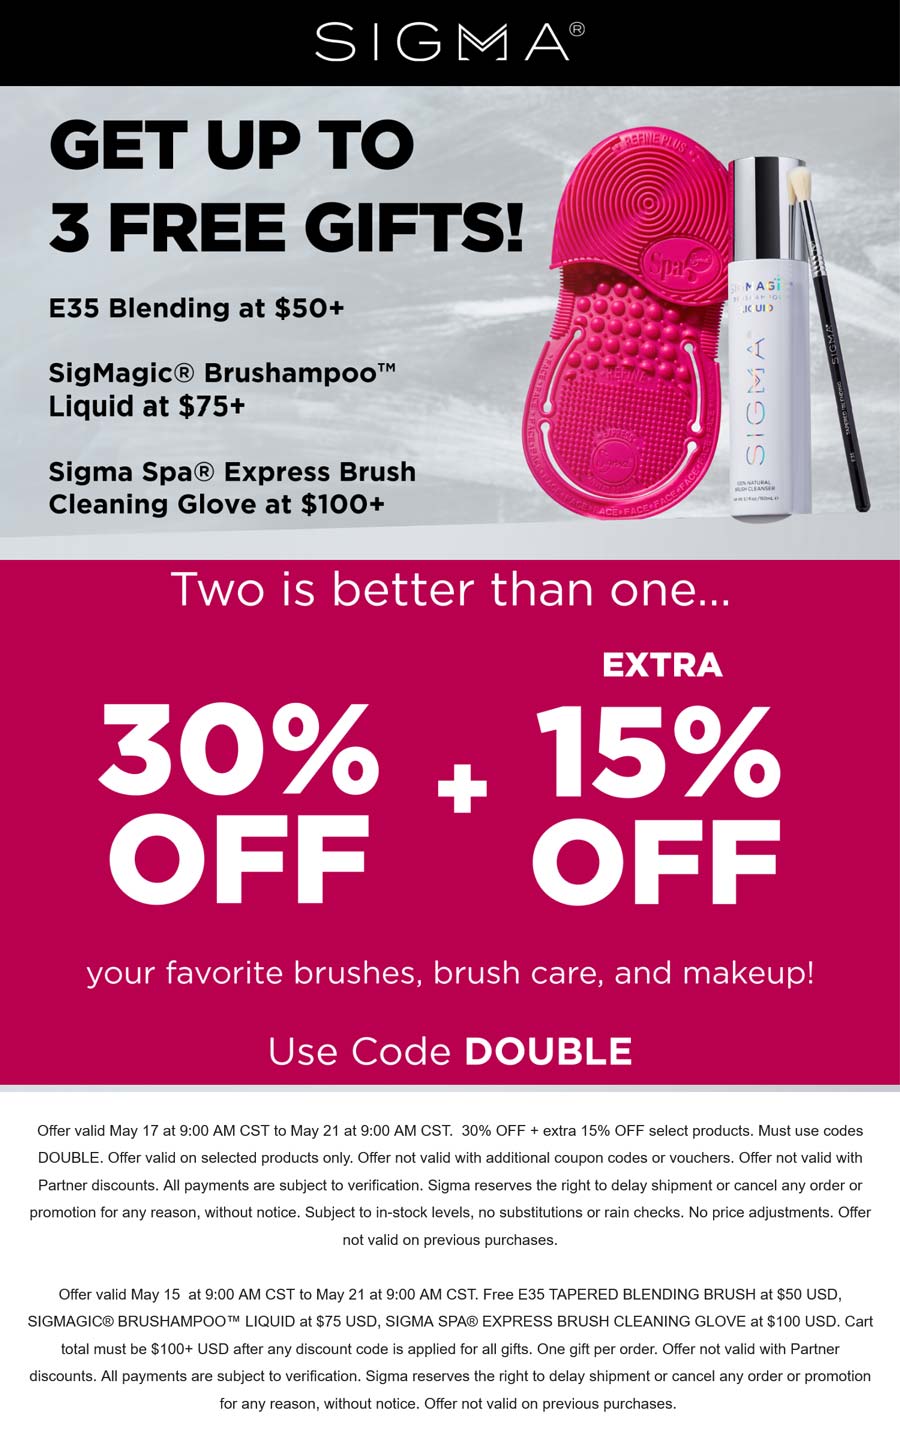 Sigma stores Coupon  45% off brush & makeup favorites + free gifts on $50+ at Sigma via promo code DOUBLE #sigma 